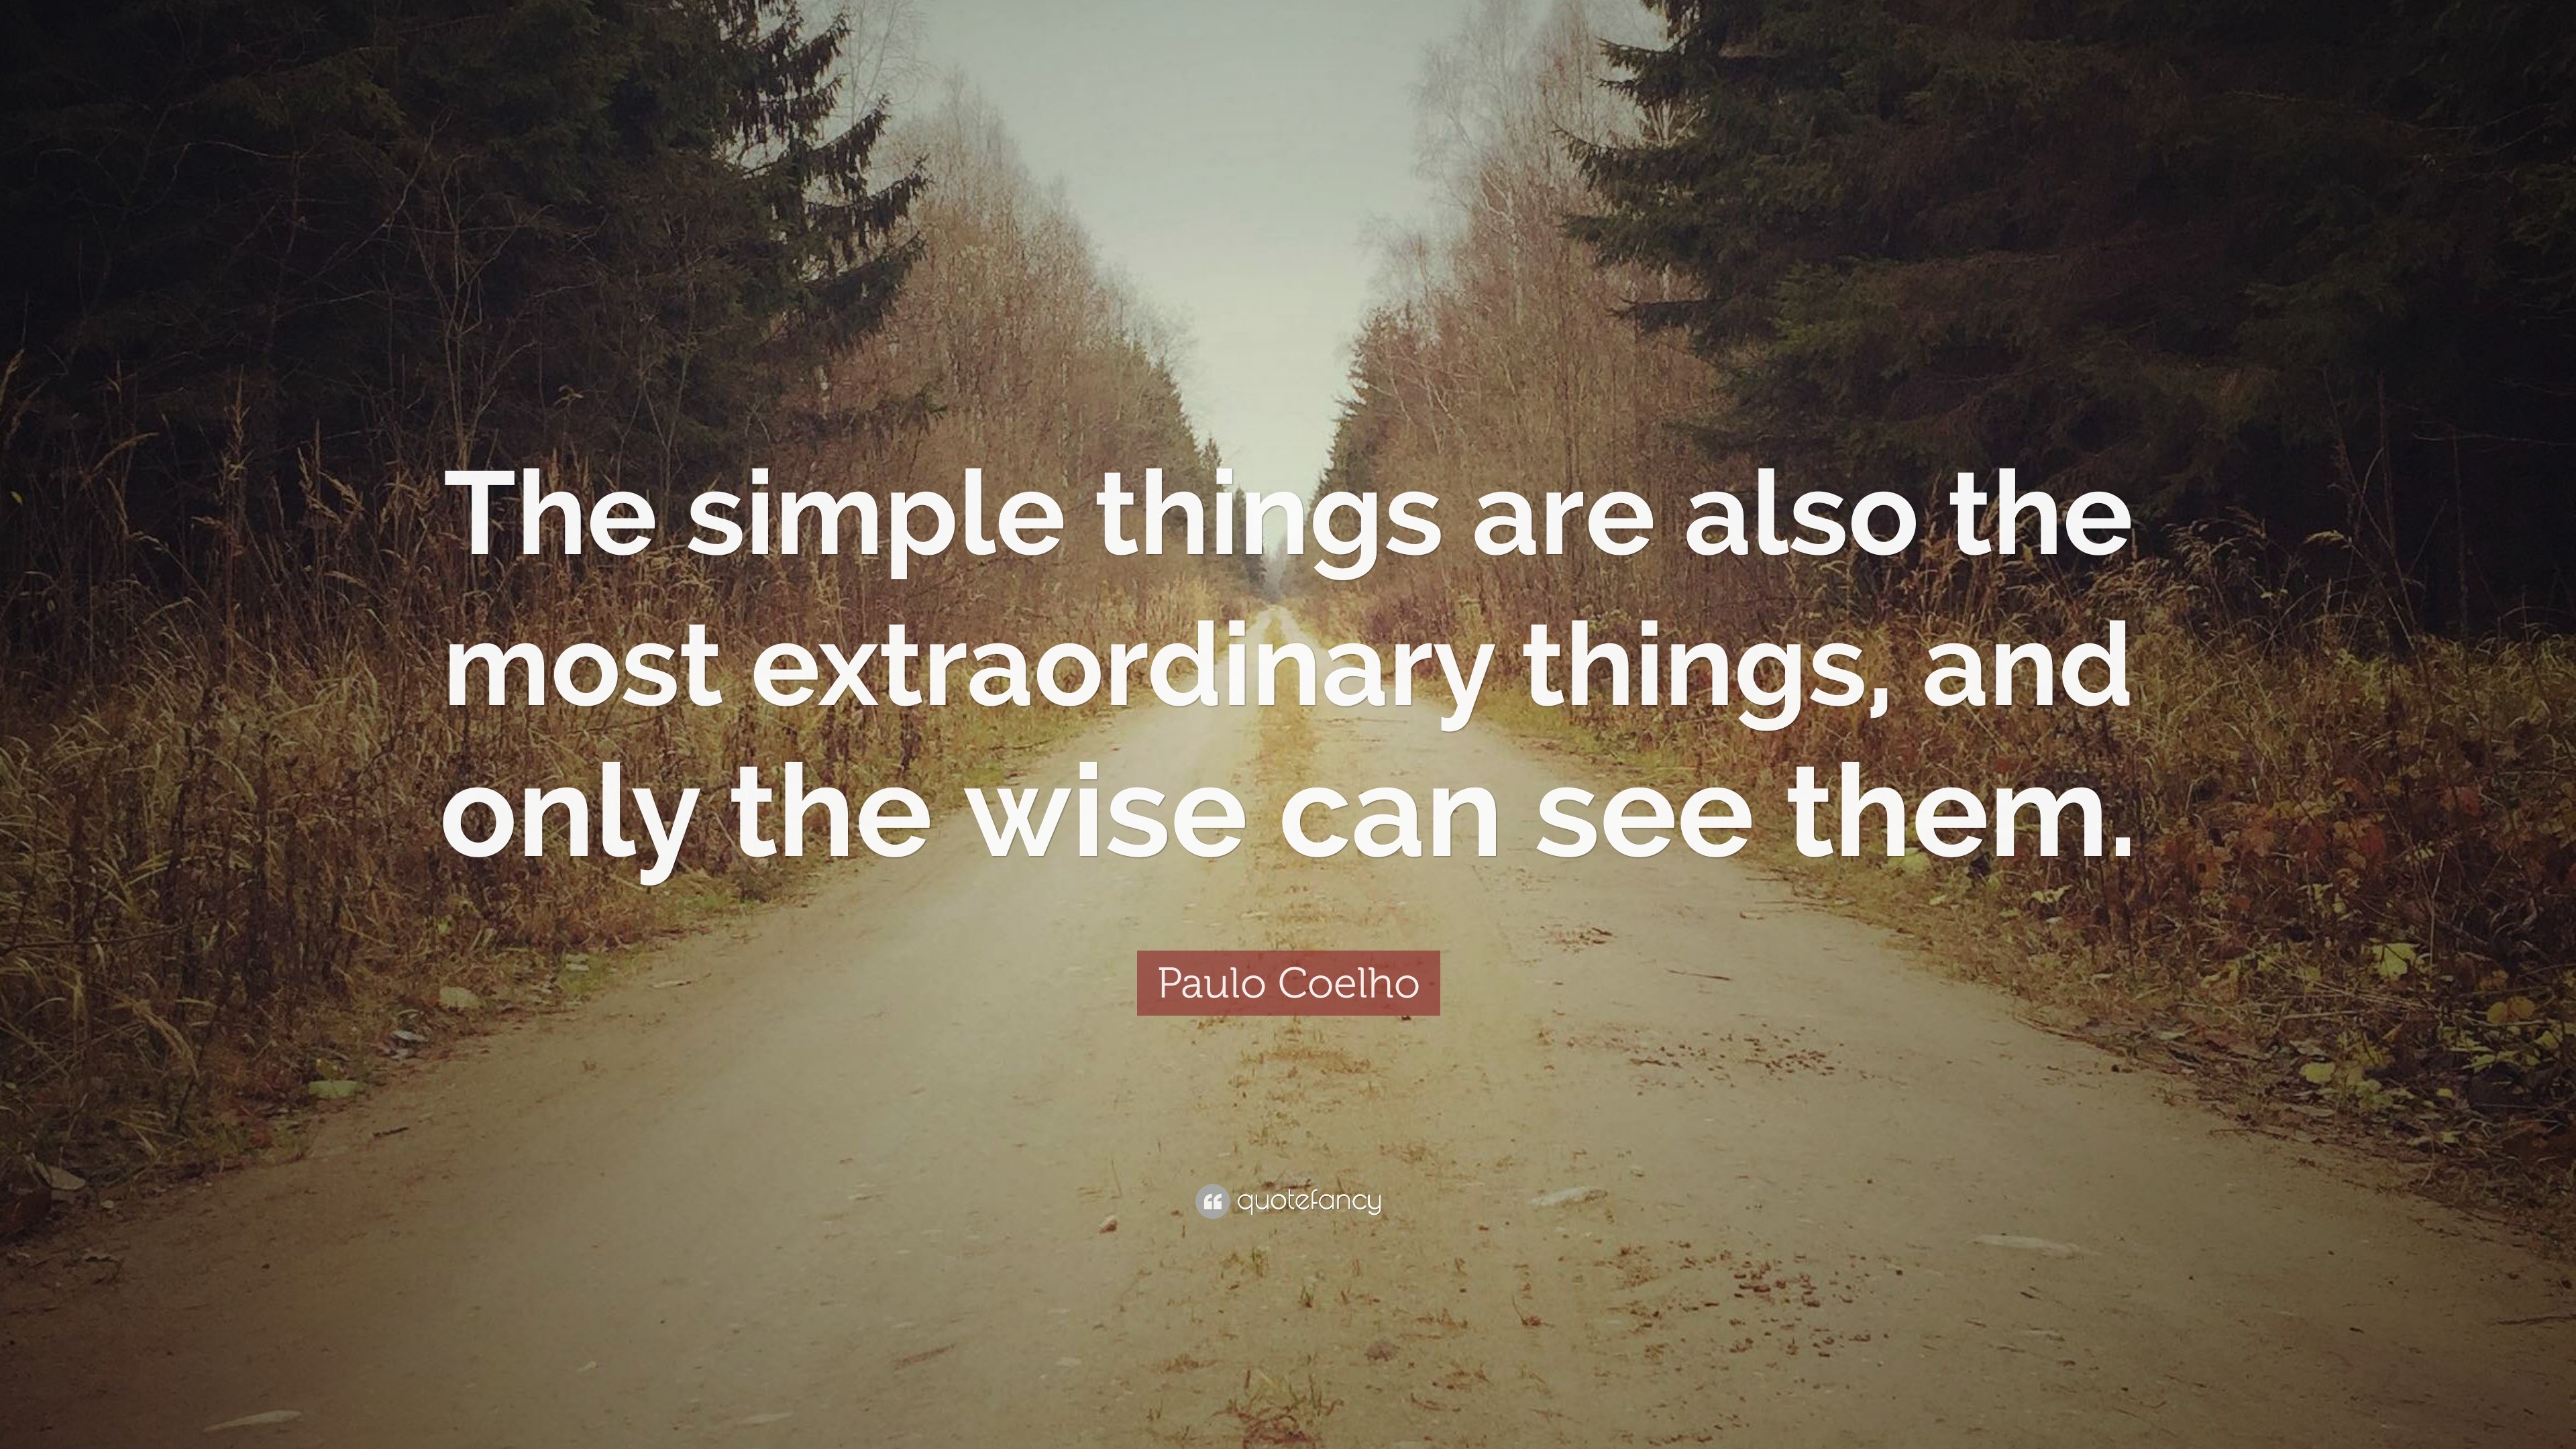 Paulo Coelho Quote “The simple things are also the most extraordinary things and